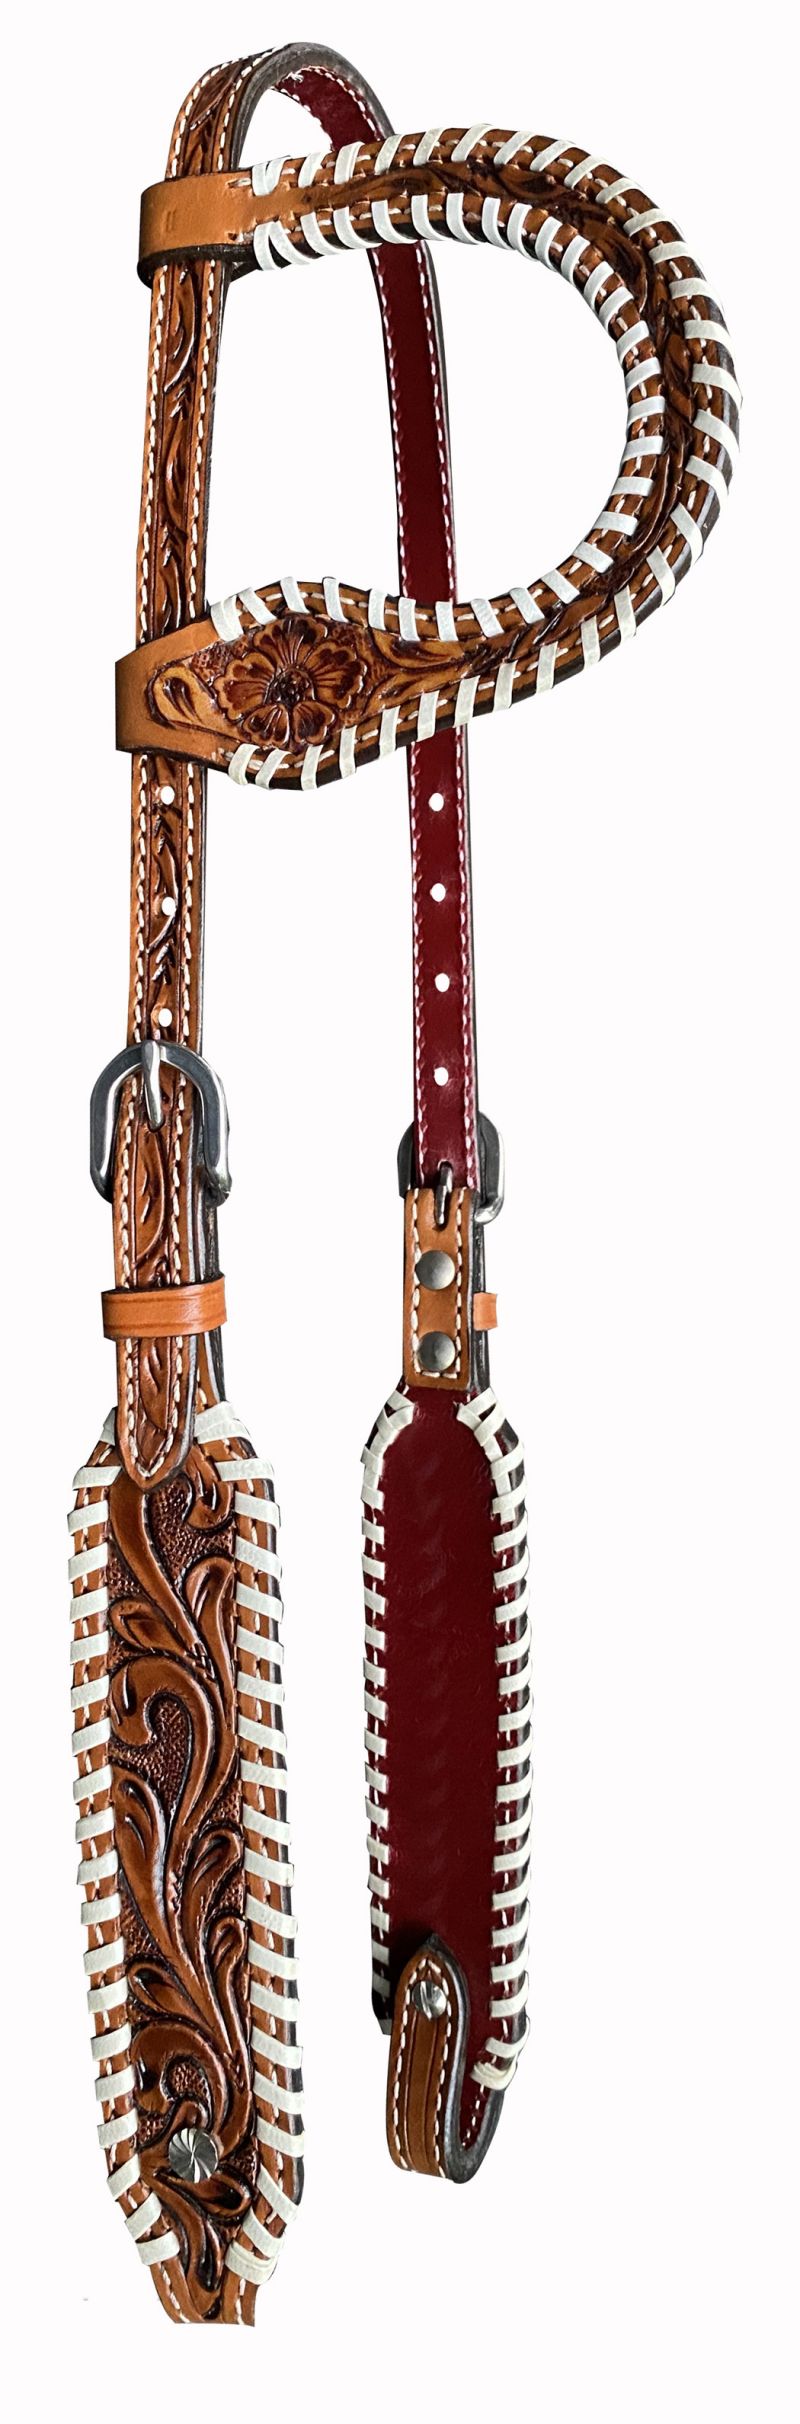 Showman  ® Floral Tooled One Ear Rawhide Laced Leather Headstall Default Shiloh   